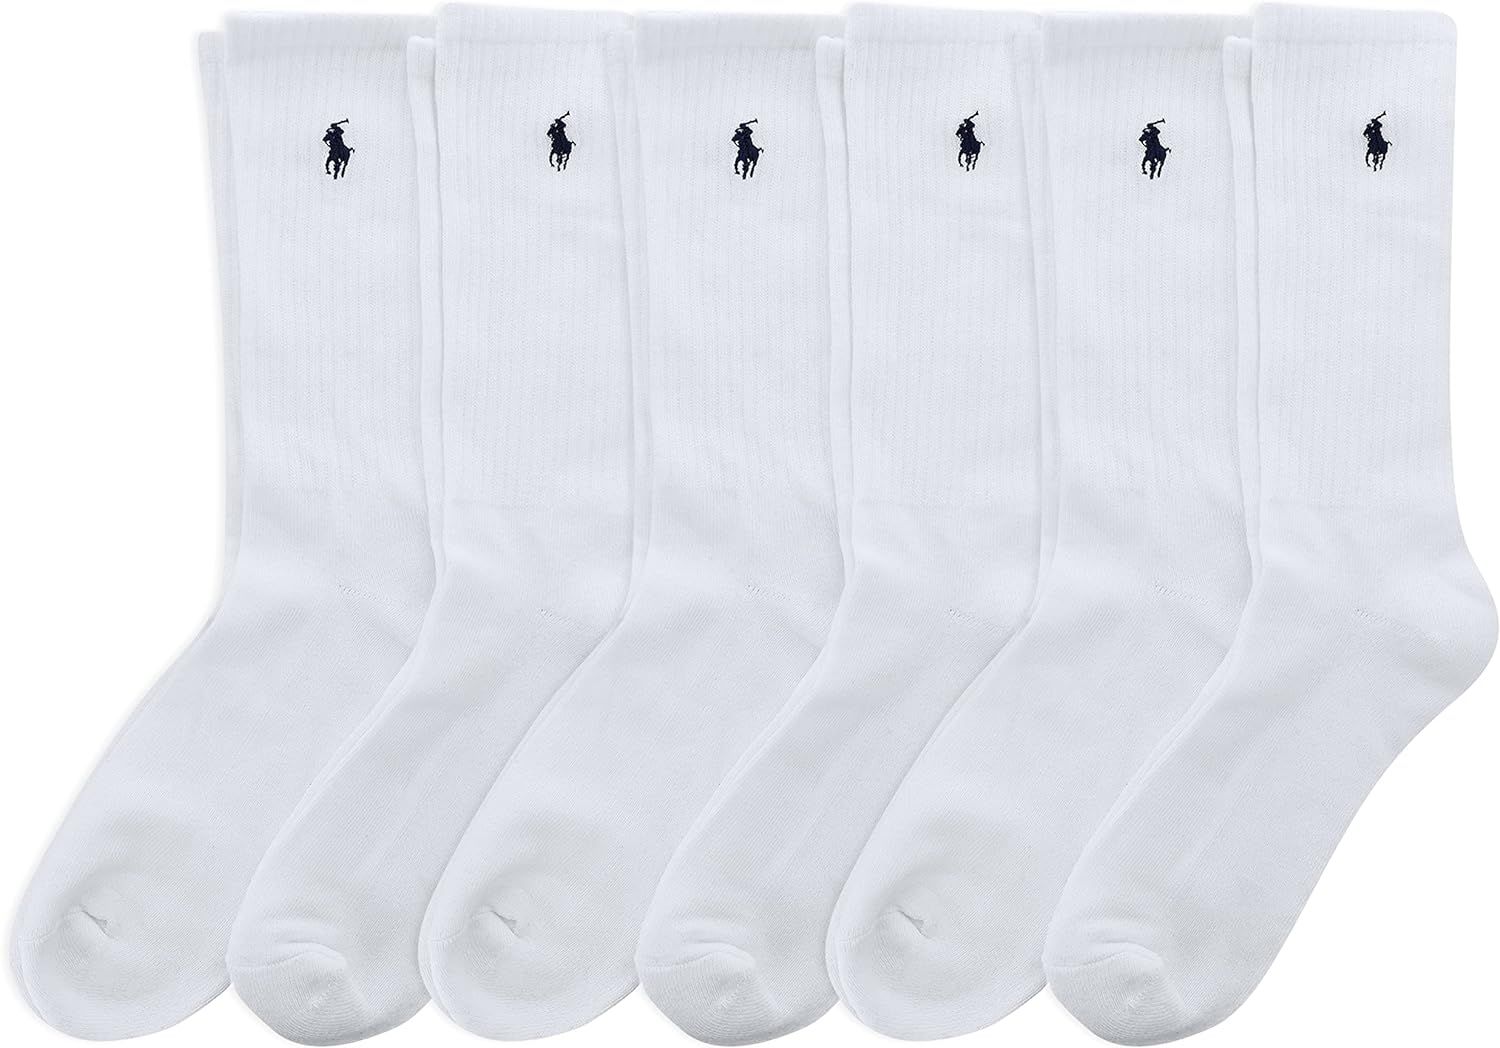 POLO RALPH LAUREN mens Classic Sport Solid Crew Socks - 6 Pair Pack - Athletic Cushioned Cotton Comf | Amazon (US)